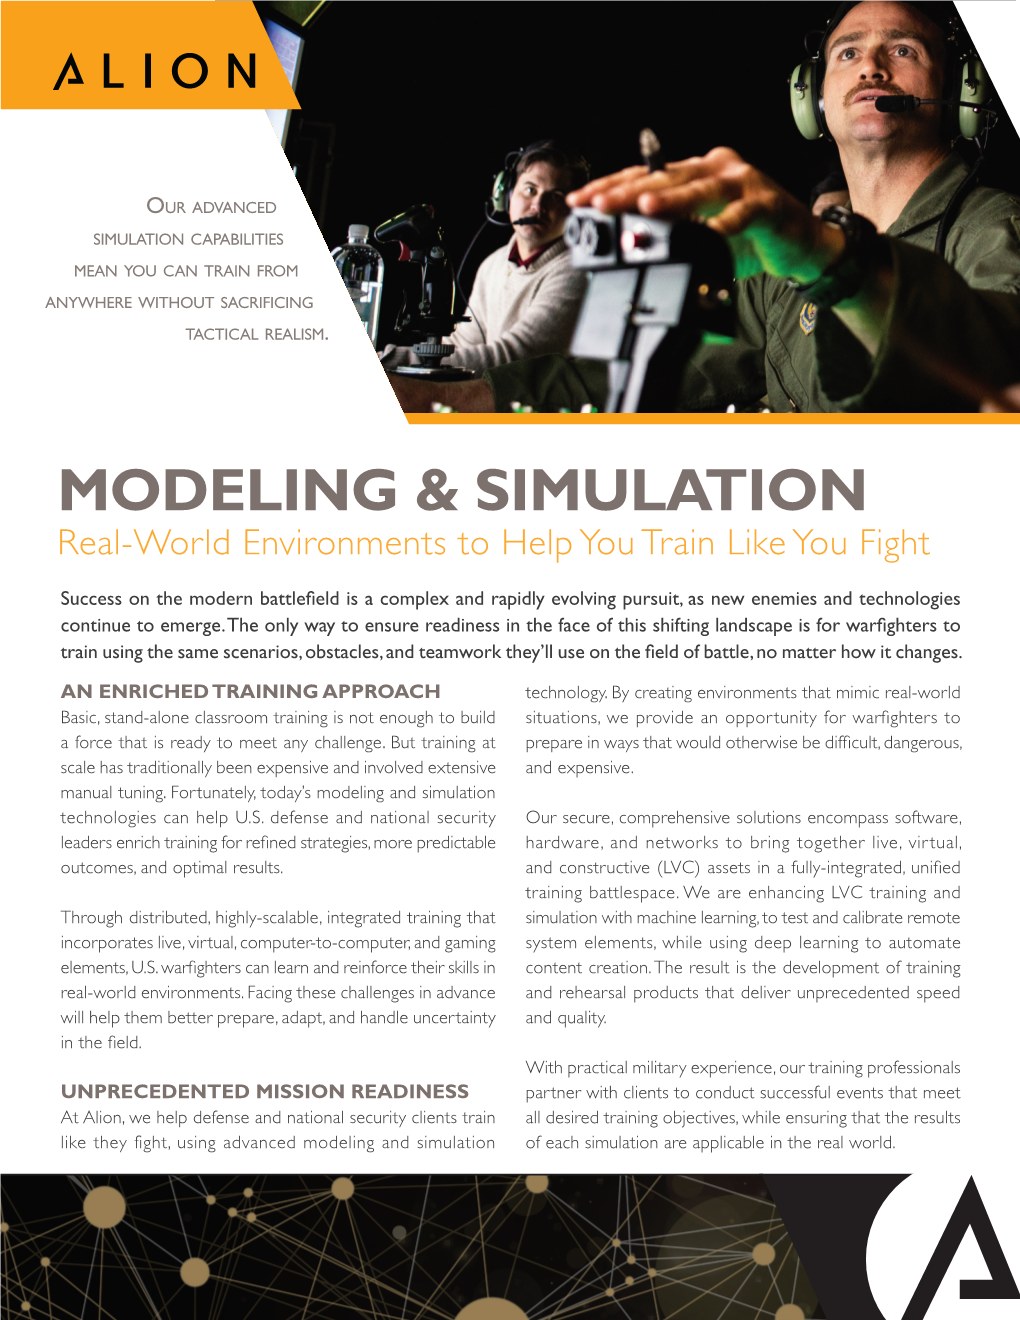 Modeling and Simulation Technologies Can Help U.S